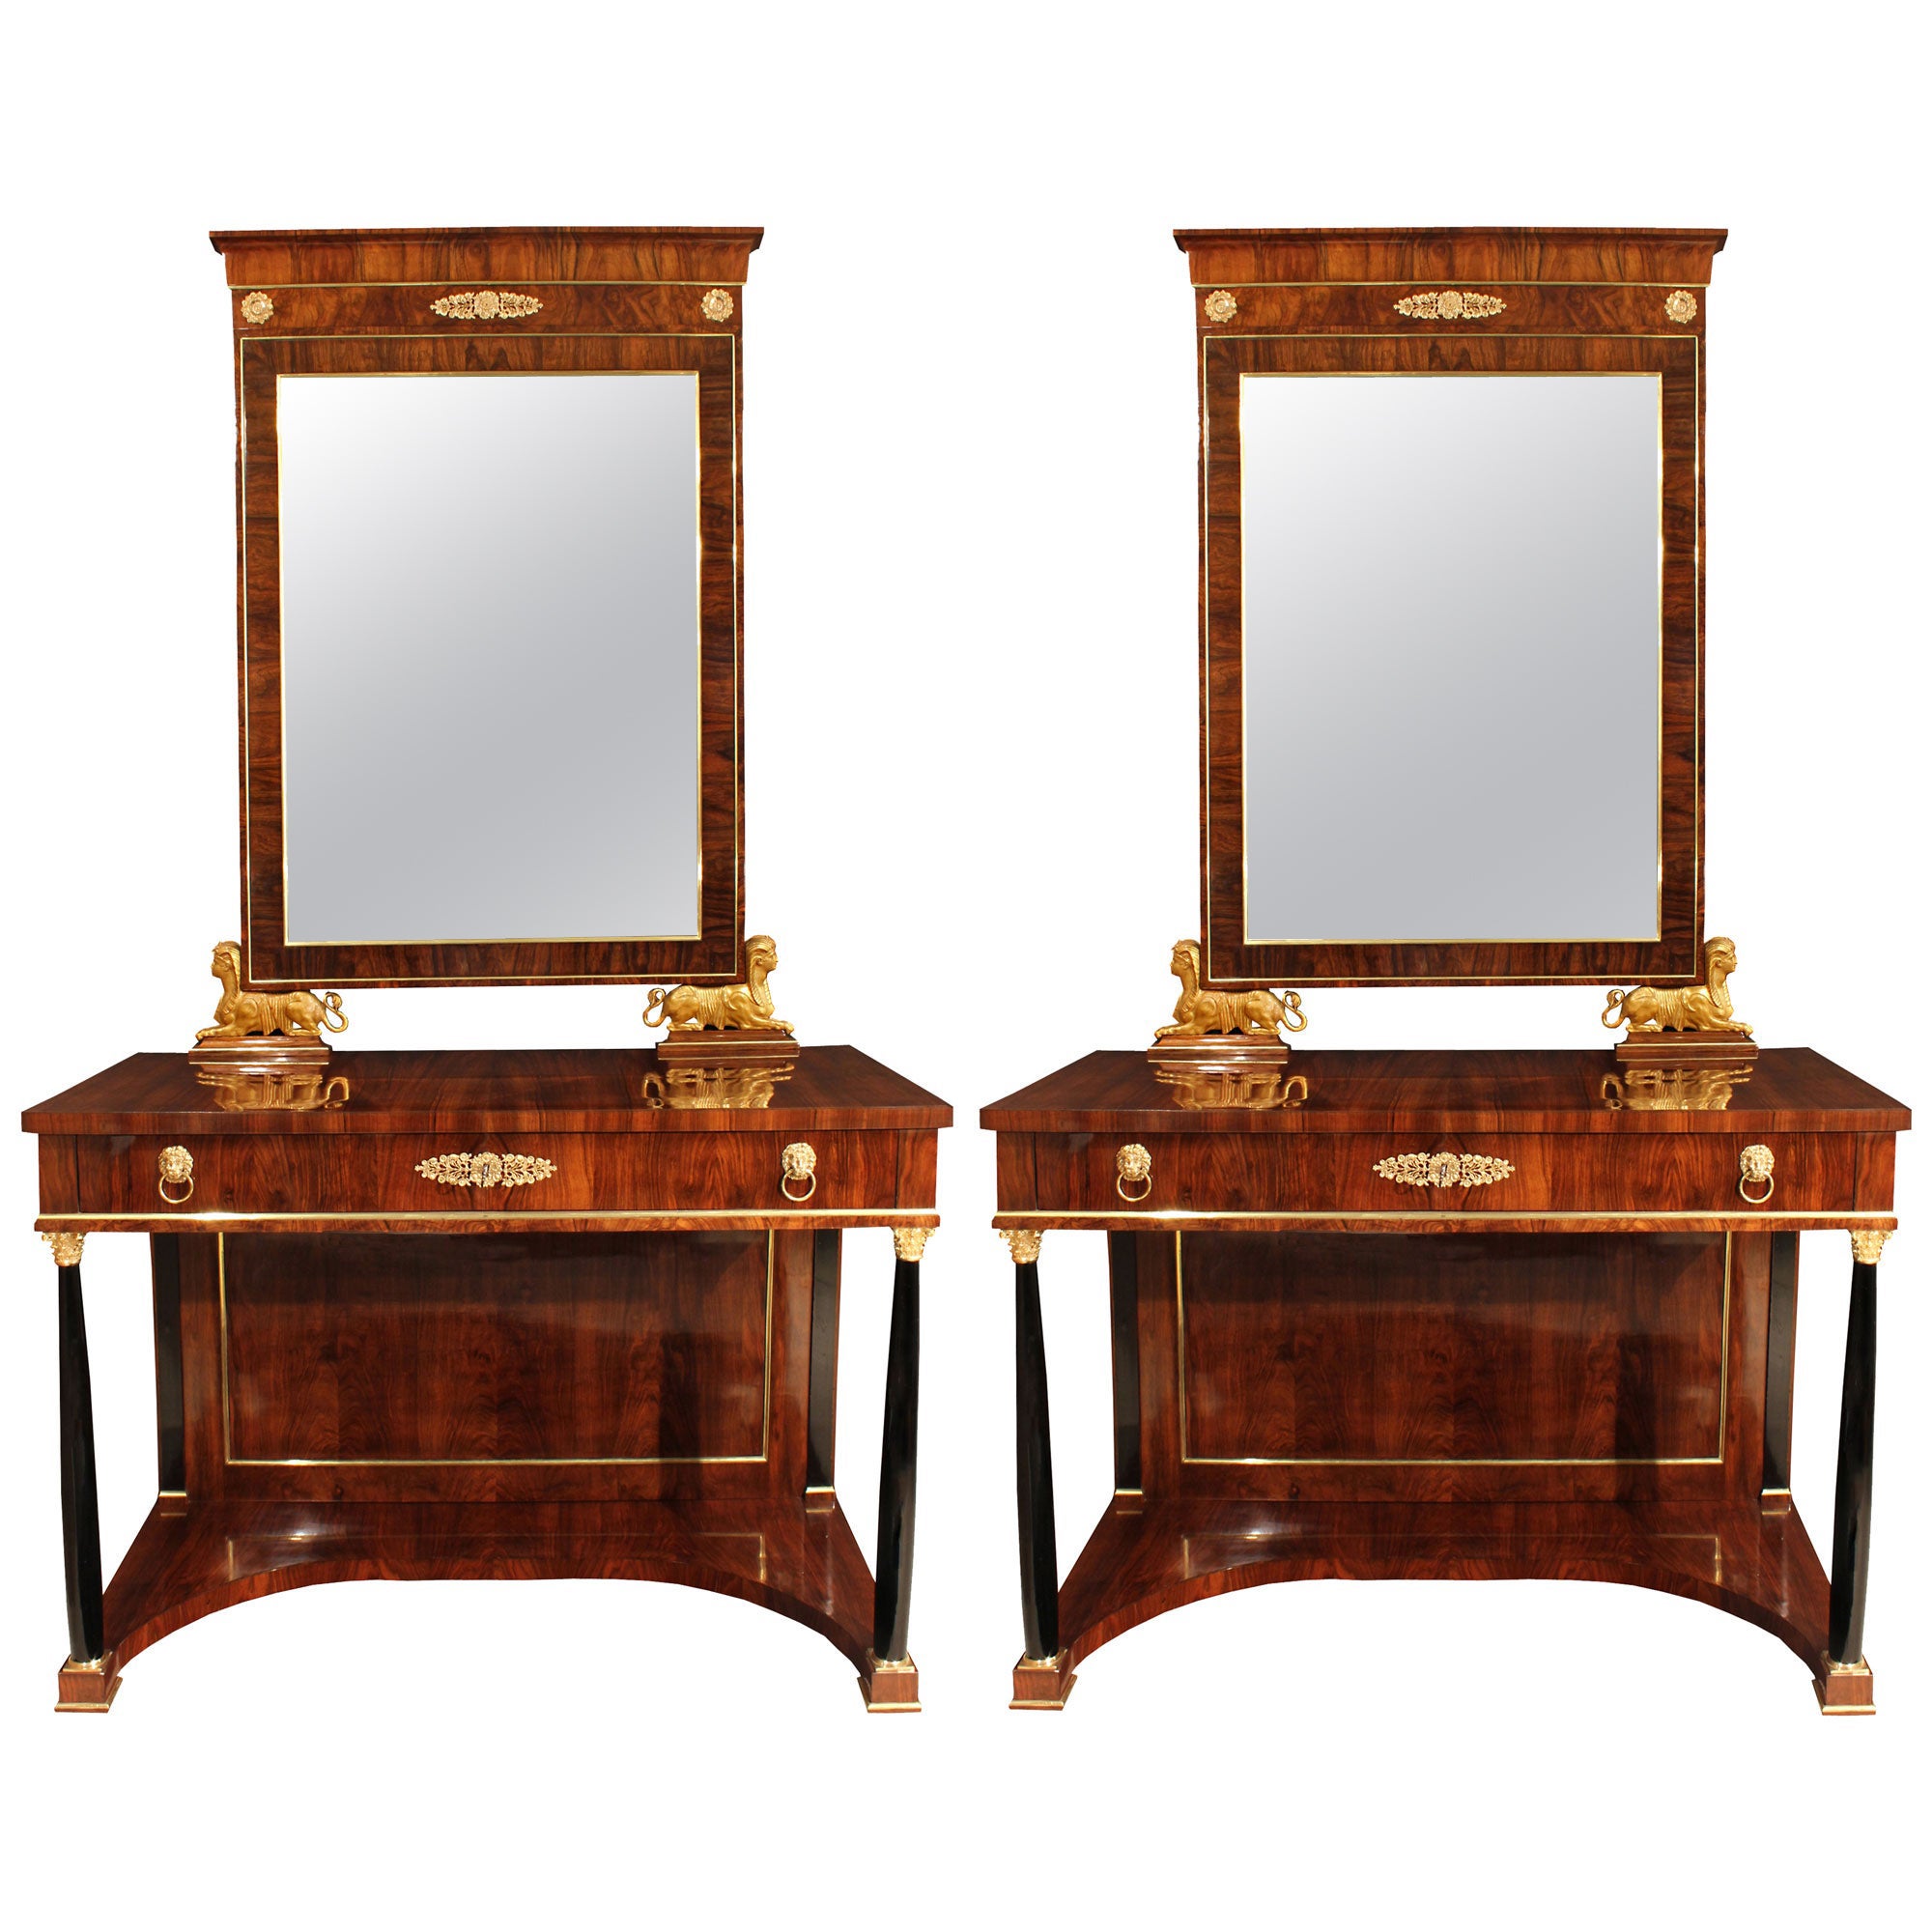 Pair of Italian 19th Century Neoclassical Style Consoles and Mirrors